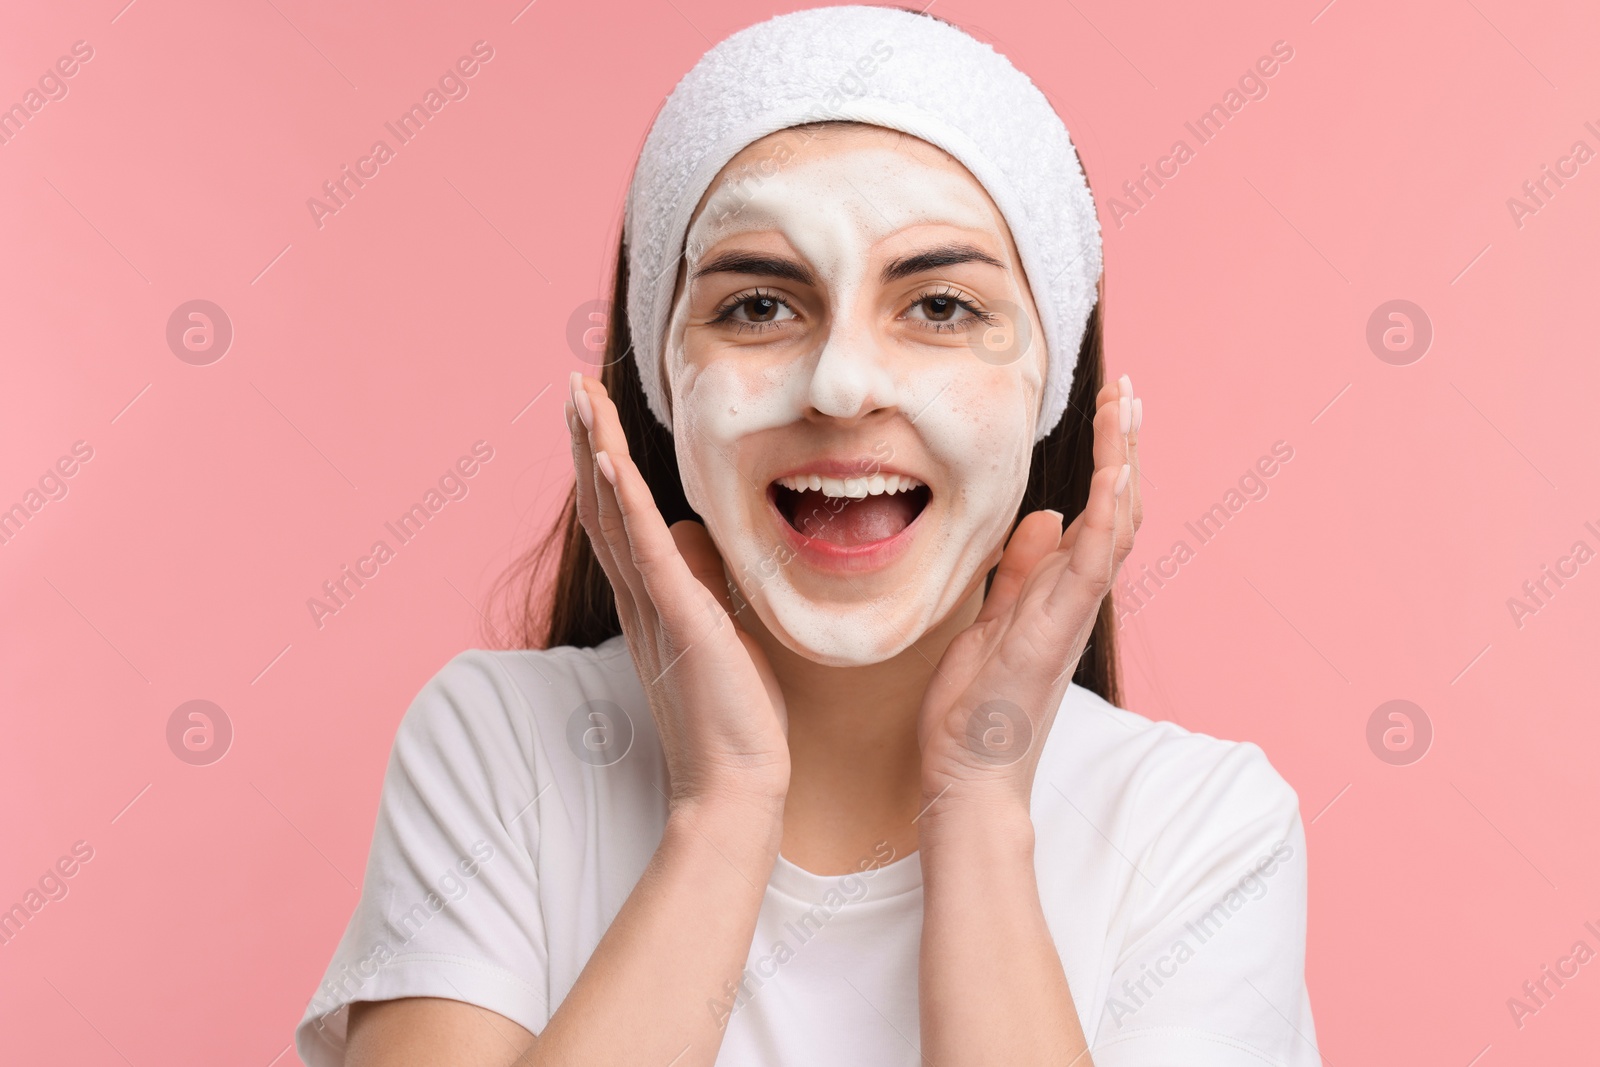 Photo of Young woman with headband washing her face on pink background